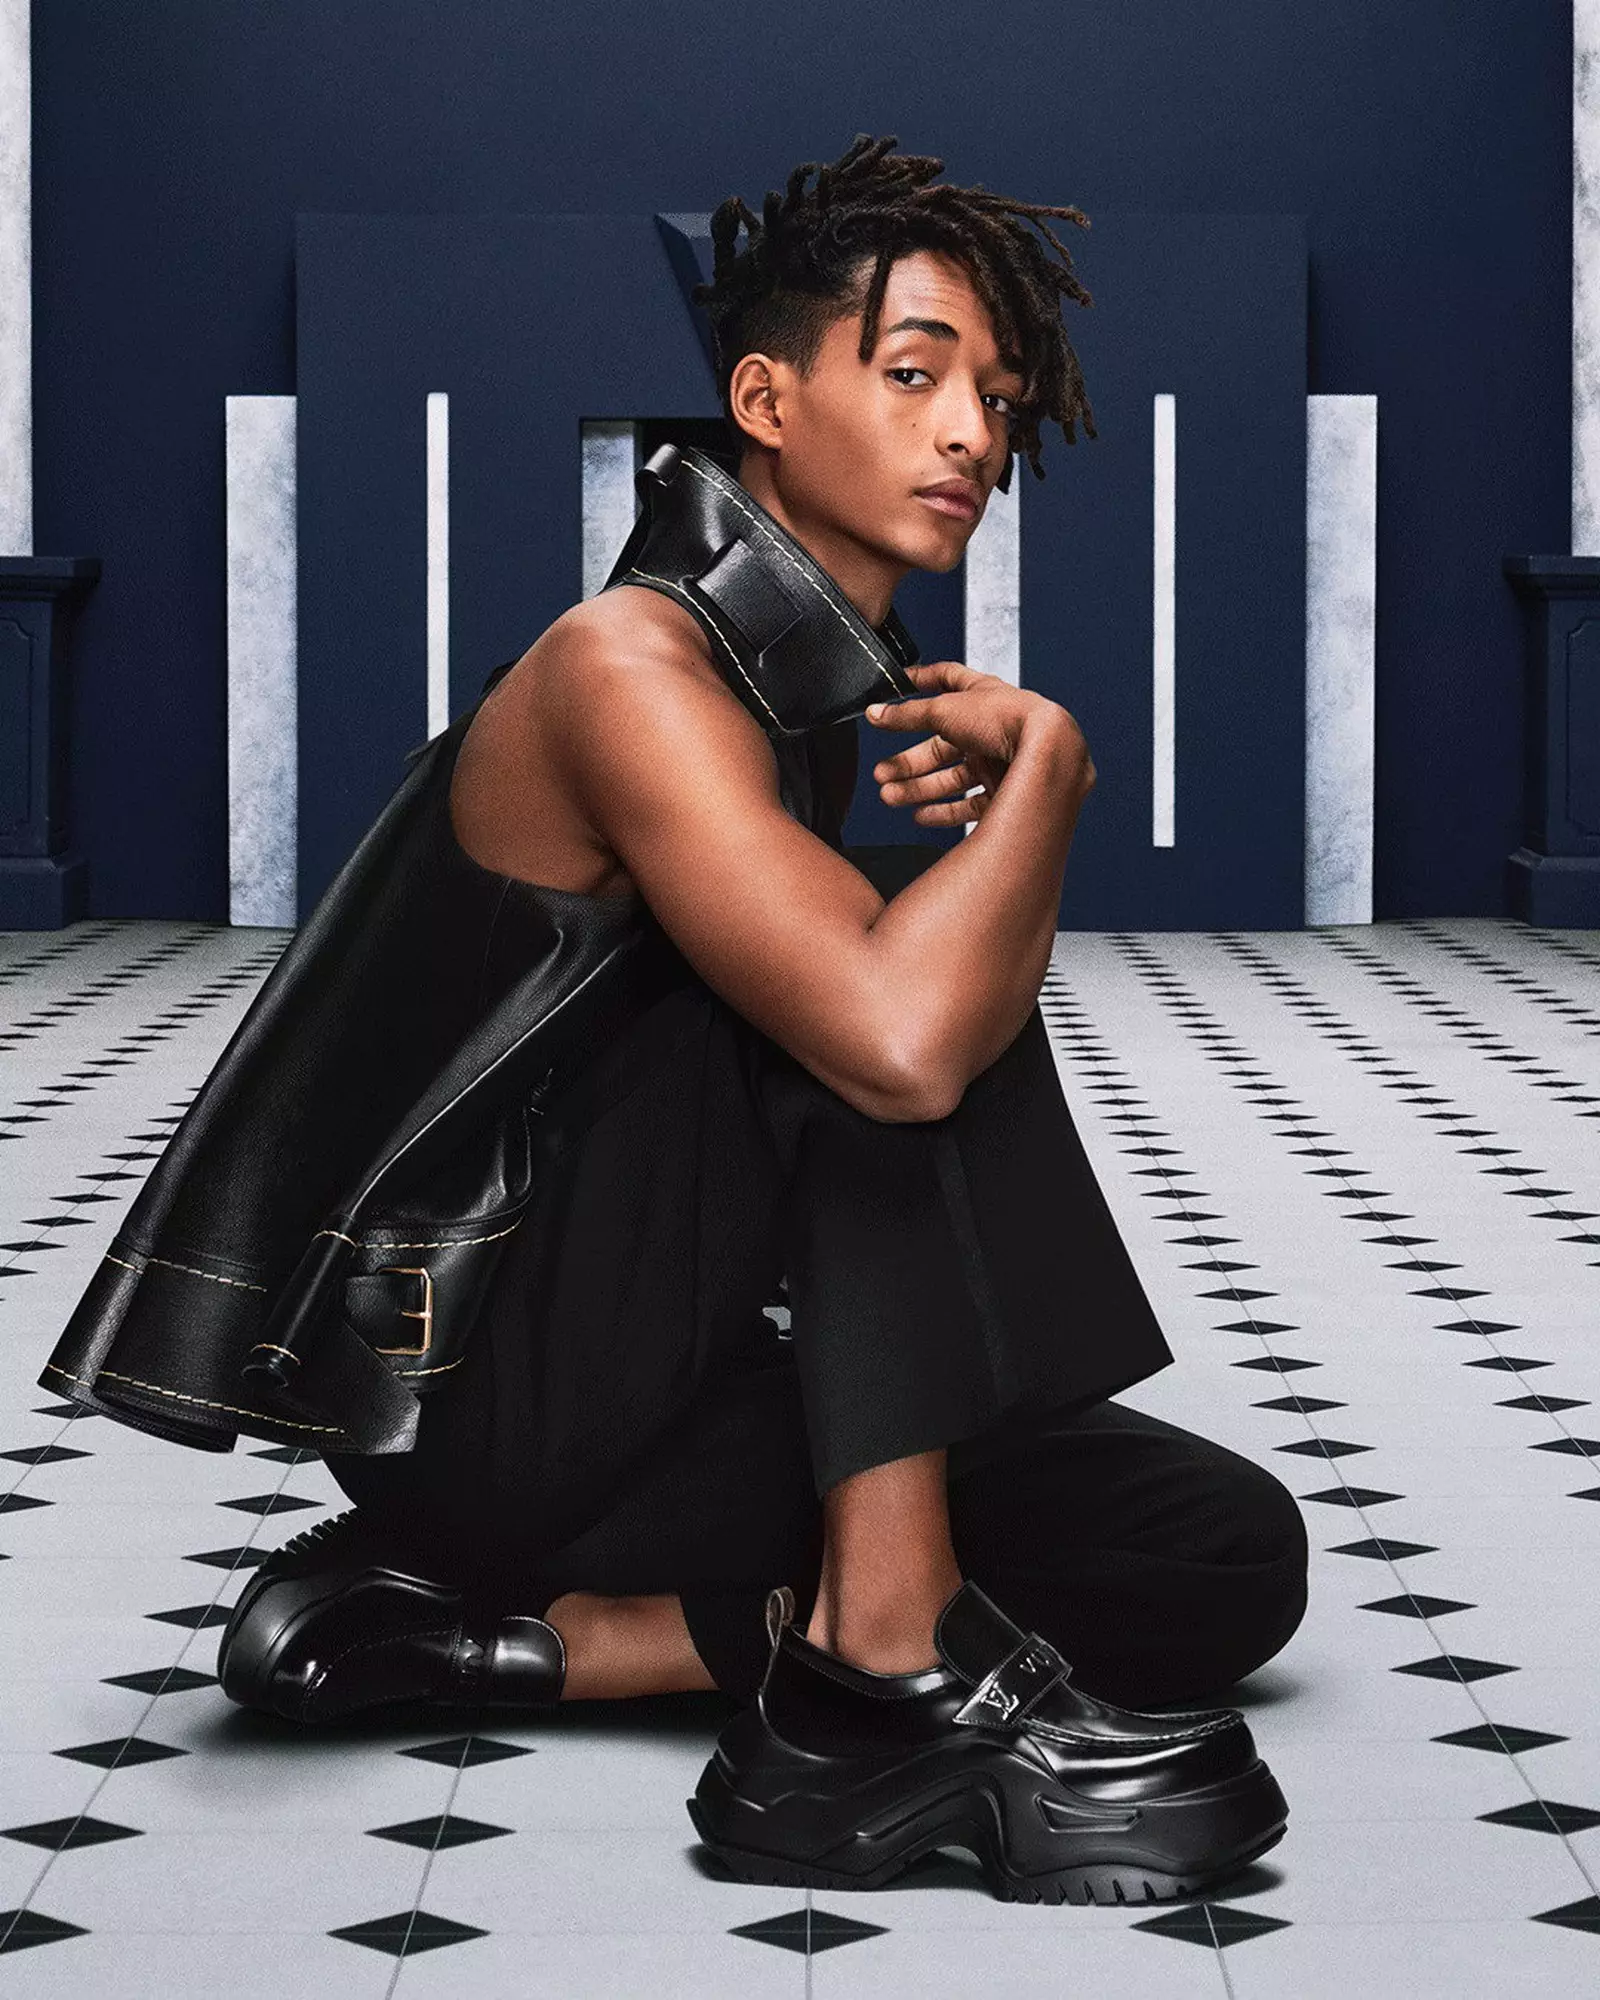 Jaden Smith’s sexuality questioned after Louis Vuitton ad